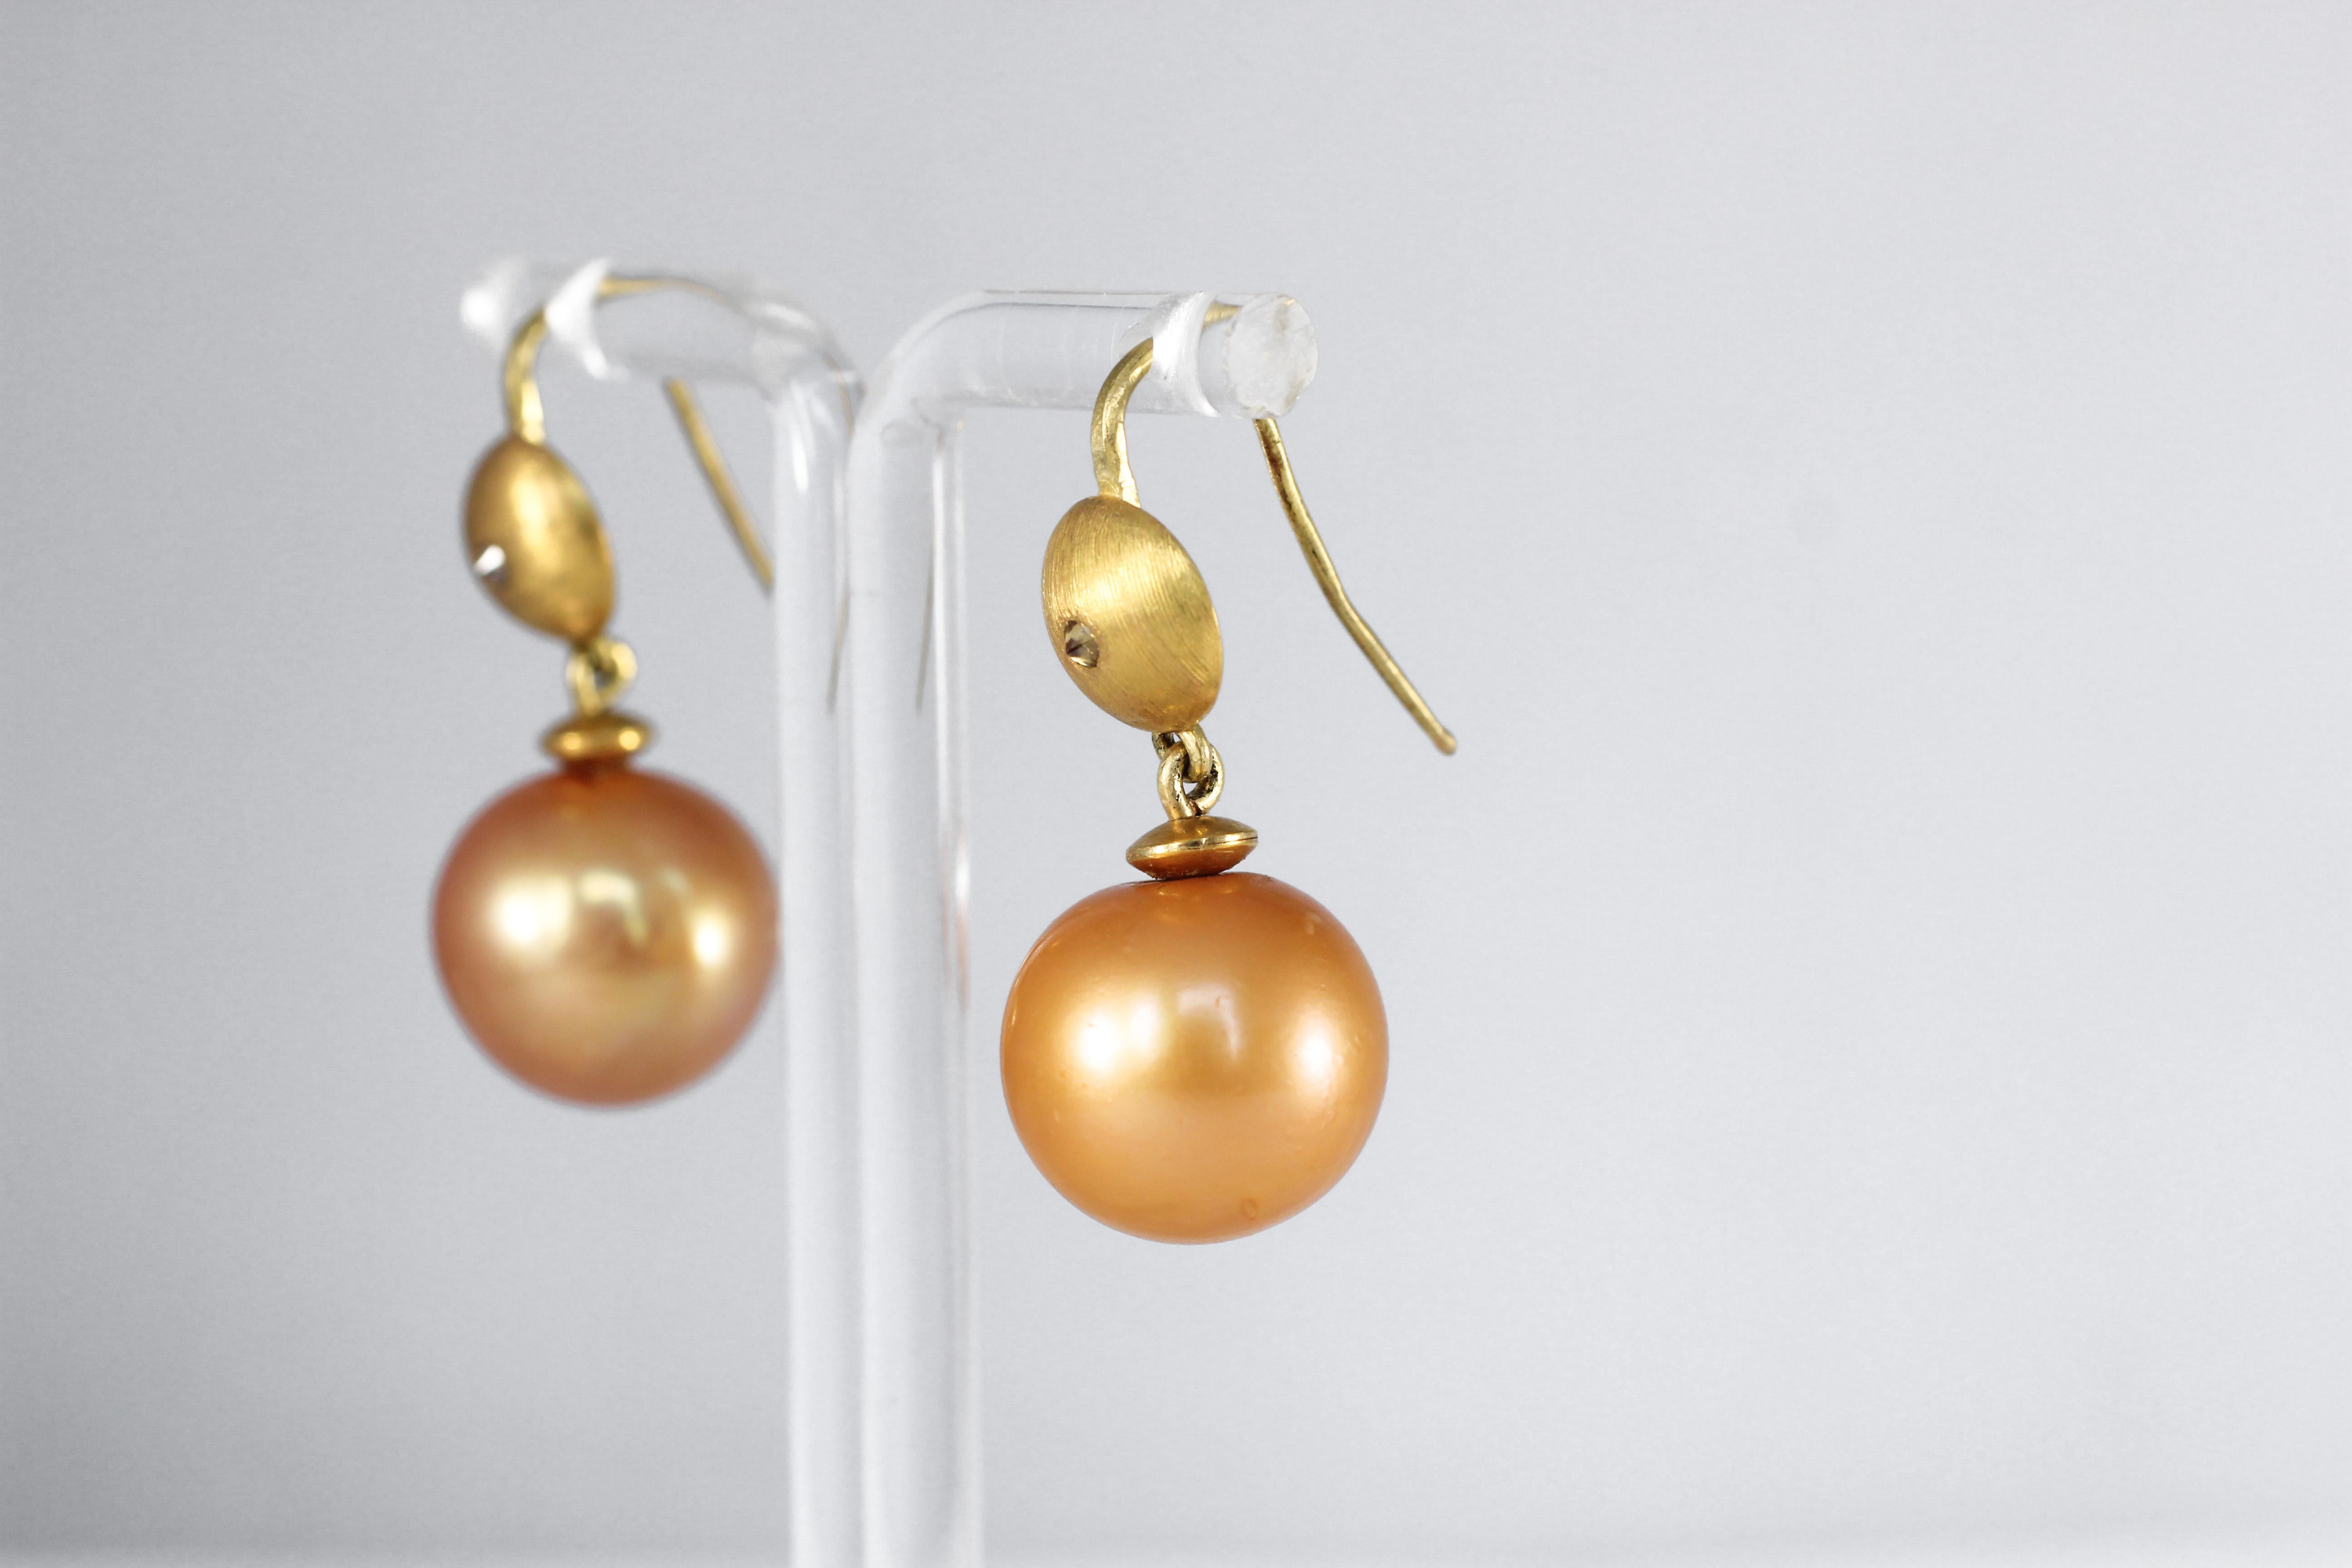 Custom order. Golden Eve Drop Earrings. These 21K gold elegant contemporary dangle earrings are an update to an all-time classic. Custom listing. Nature's marvel, a large 15mm golden-orange cultured Pearl is reflected in an engraved golden